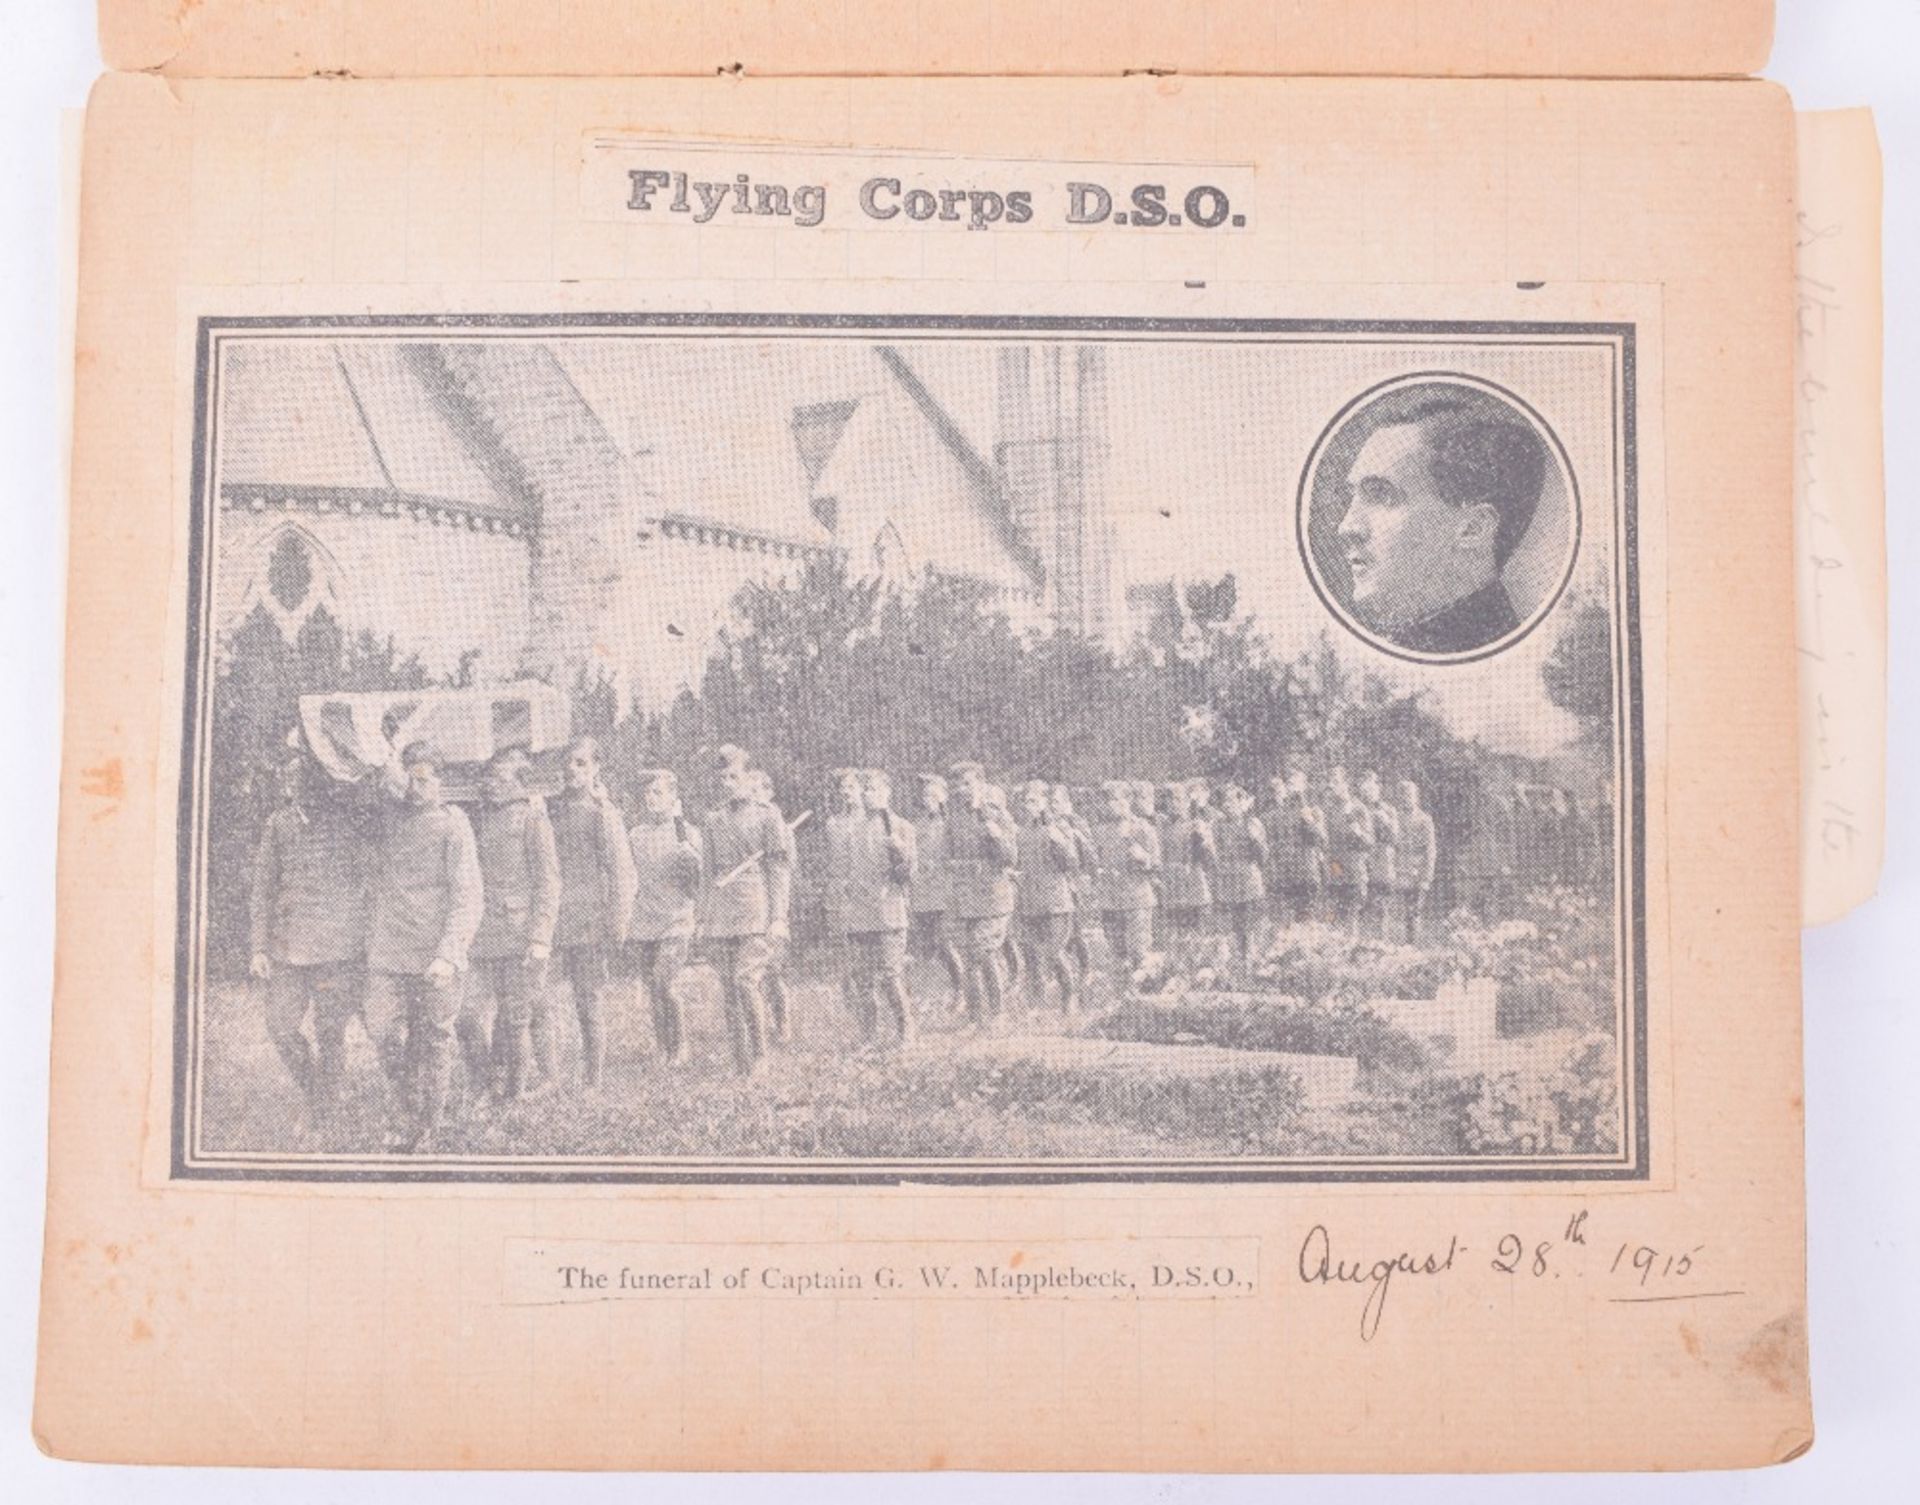 Royal Flying Corps Memorial Scrapbook to Captain G W Mapplebeach, Killed on August 24th 1916 at Joyc - Image 7 of 15